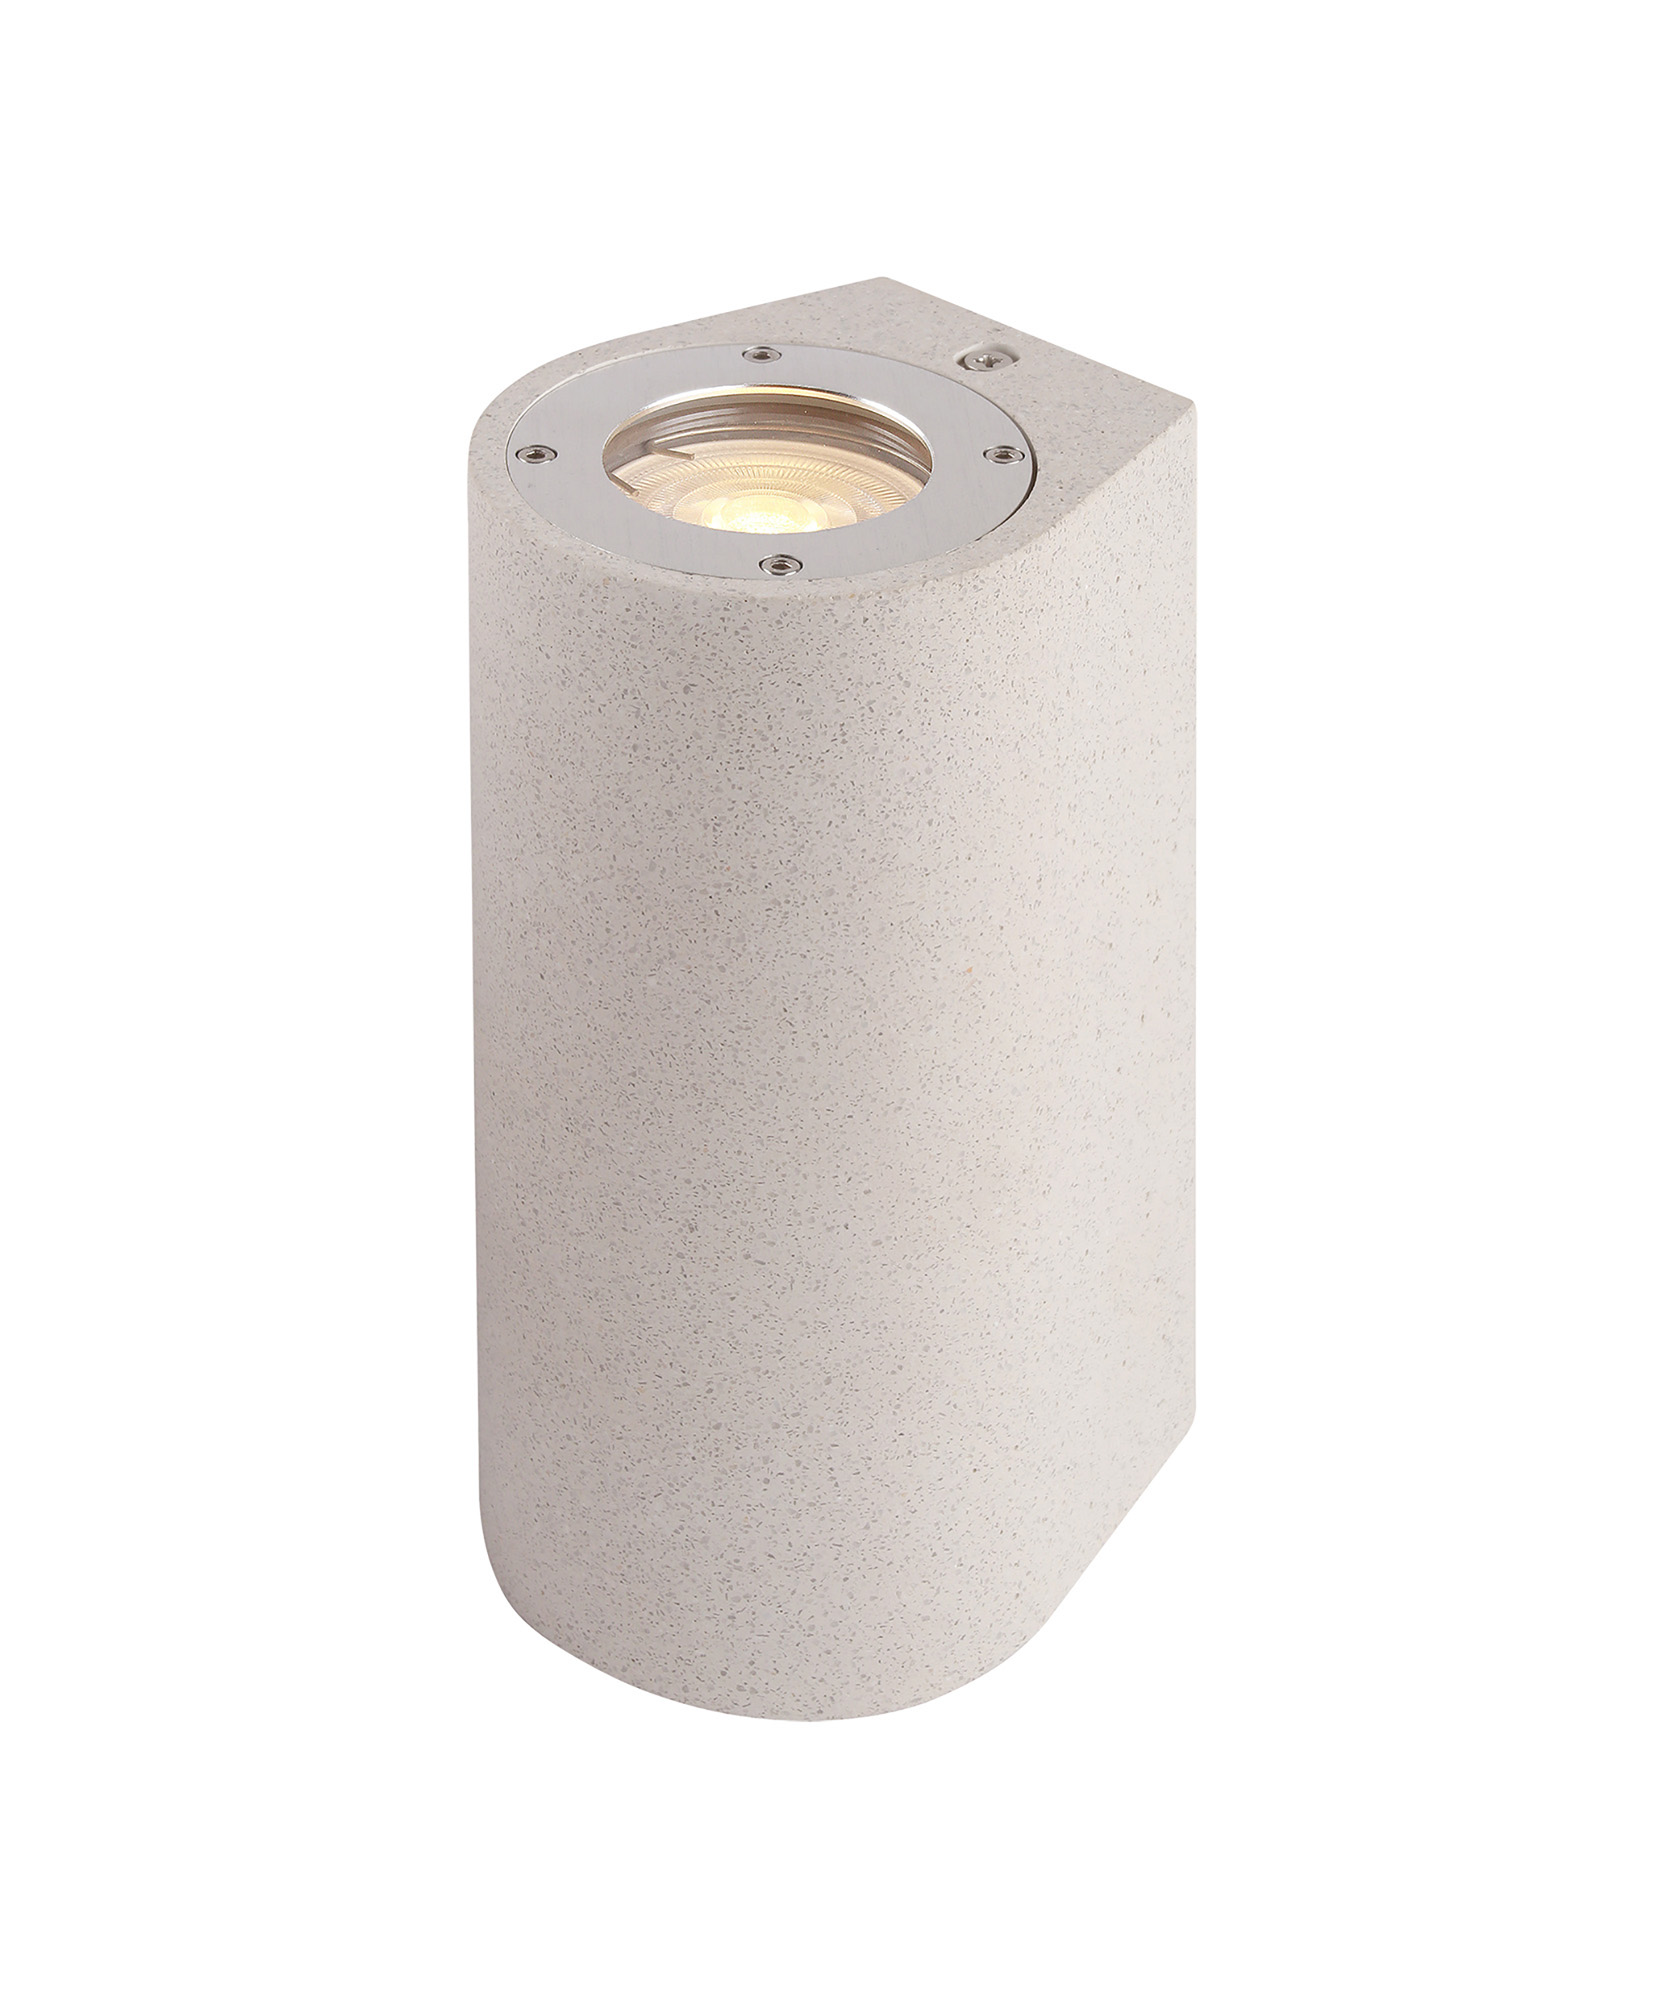 M7180  Levi Round Wall Lamp 2 Light IP65 Outdoor White Concrete